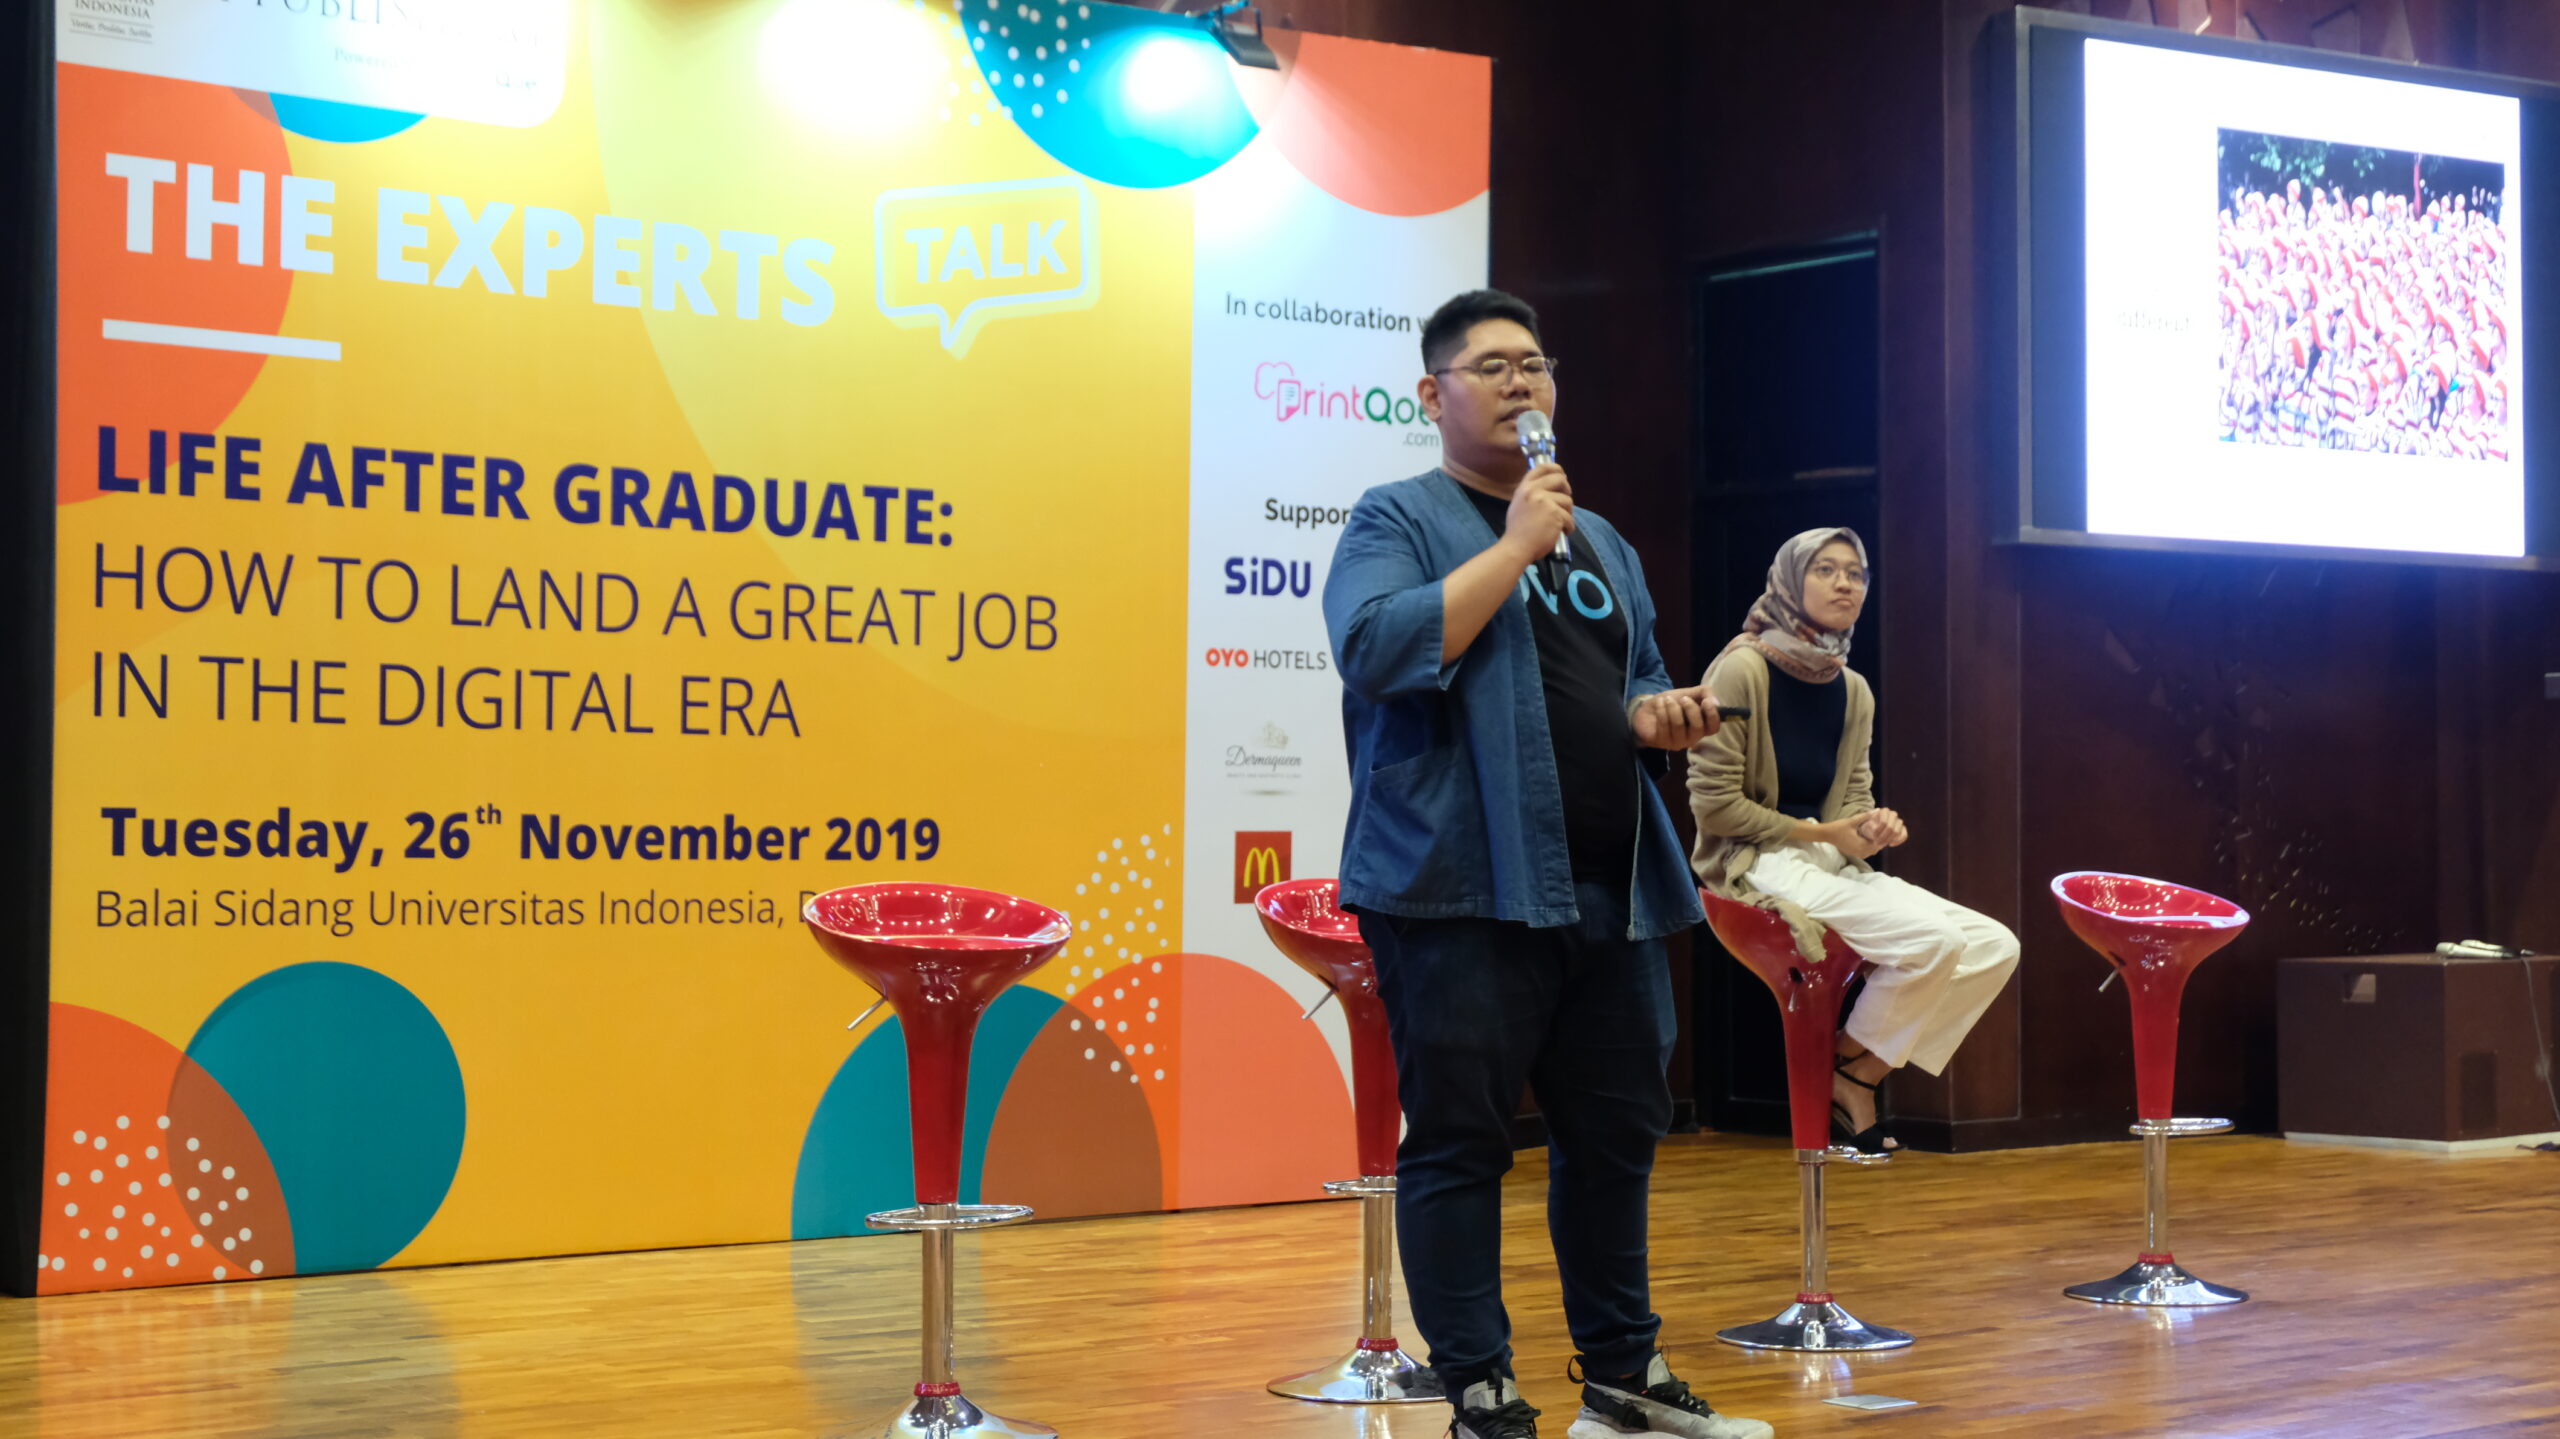 the-expert-talk-life-after-graduate-how-to-land-a-great-job-in-the-digital-era